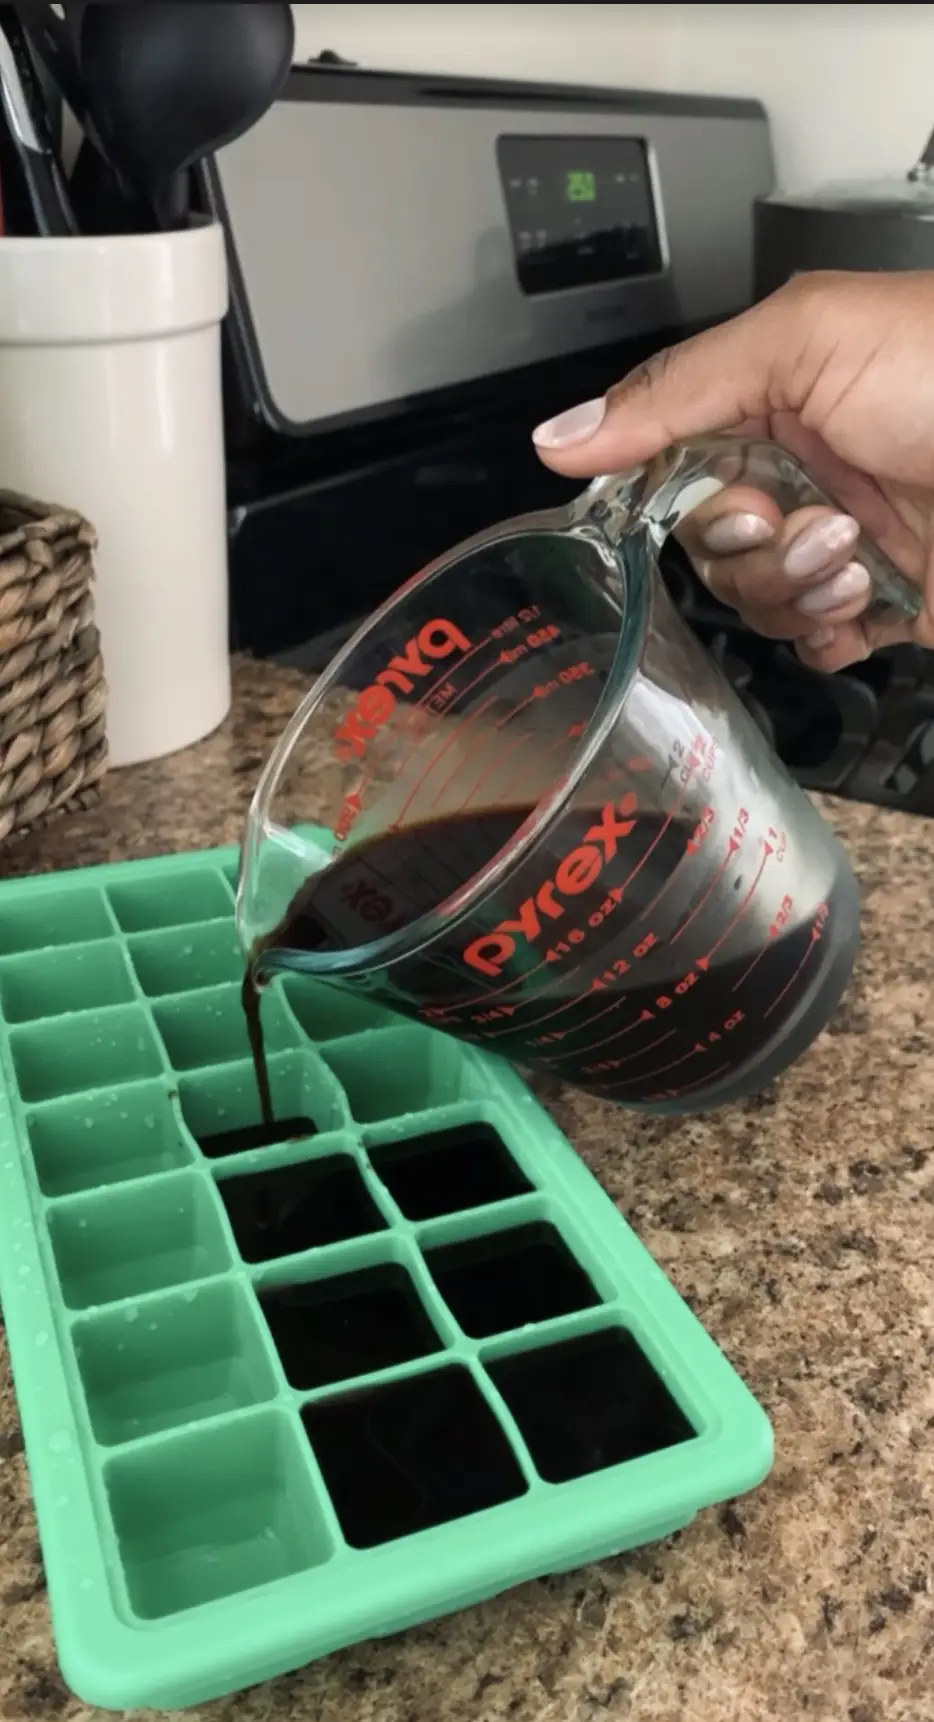 Coffee poured into an ice cube tray